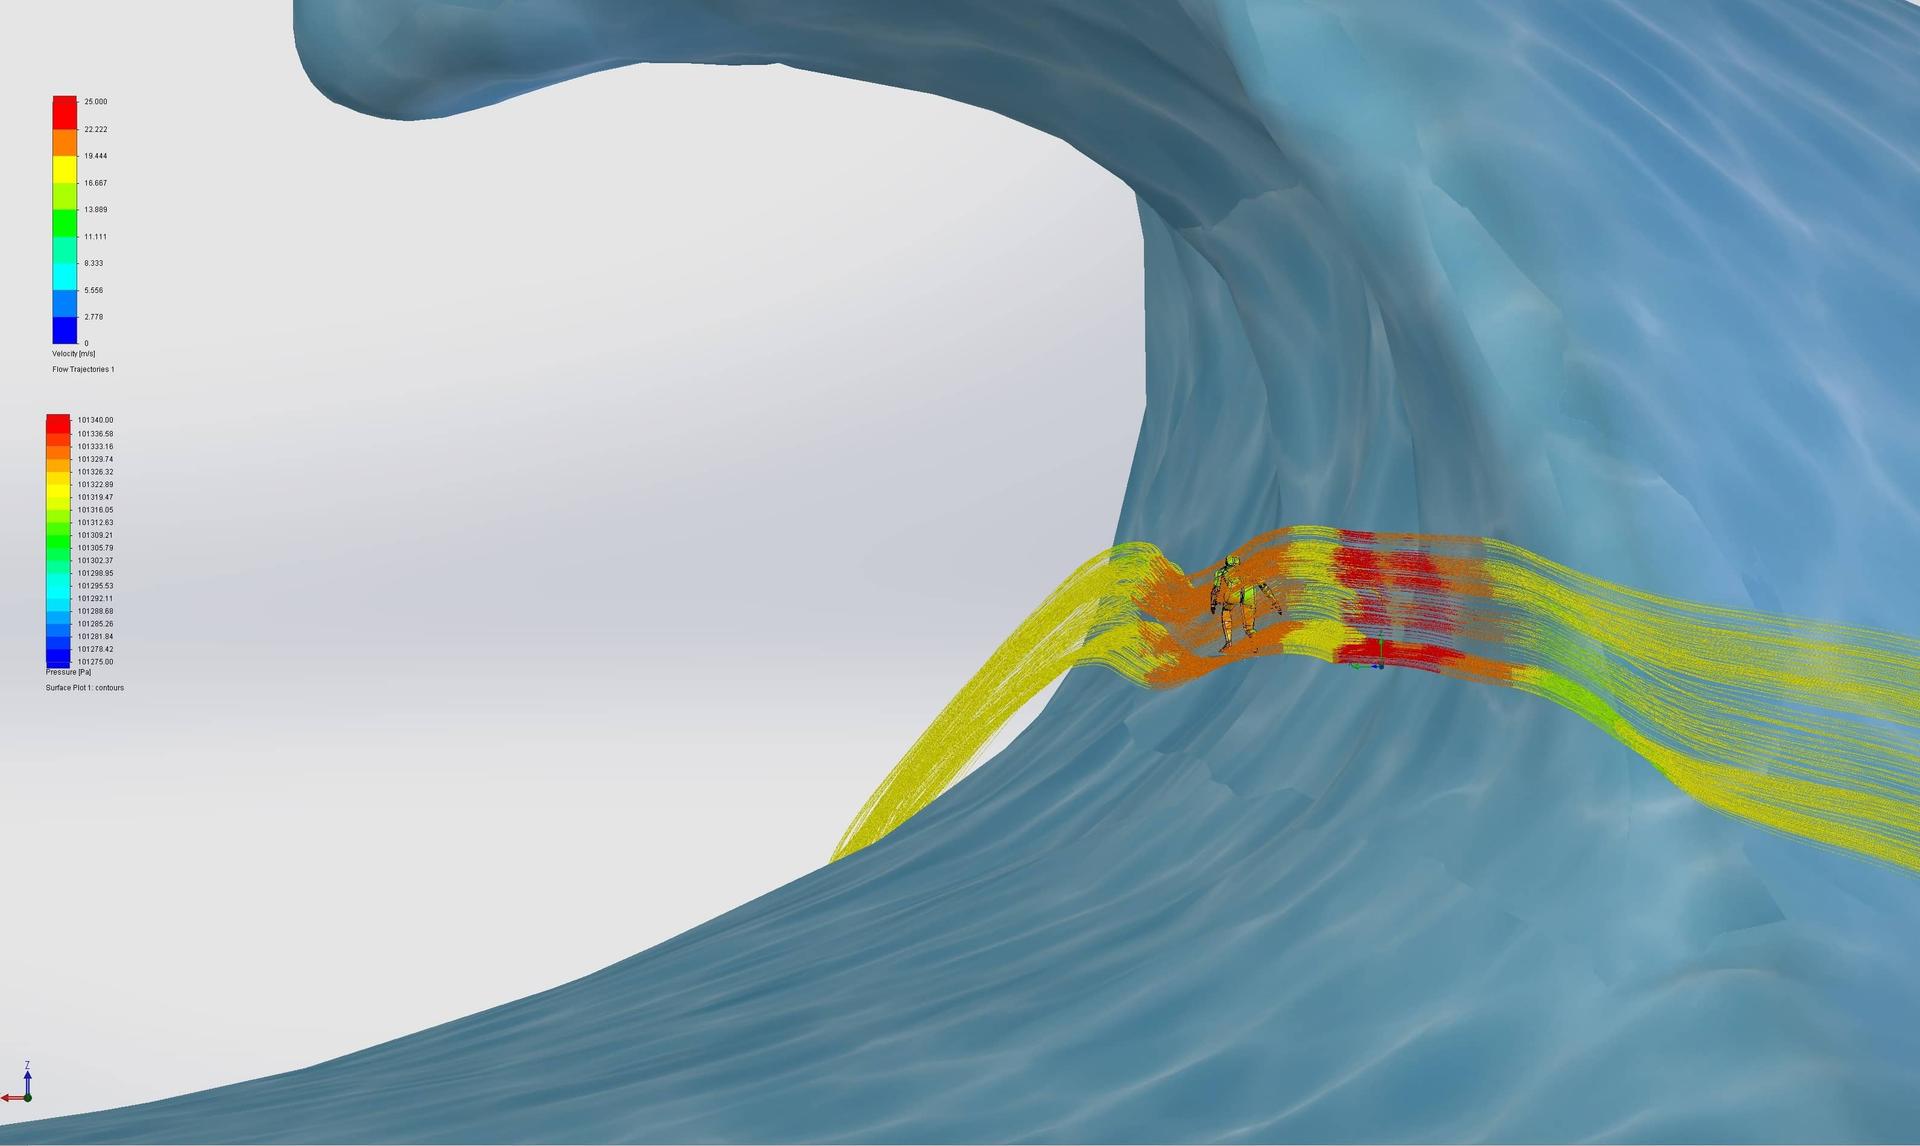 Aerodynamic simulation of Ian Walsh surfing a big wave - image by Falcon Pursuit